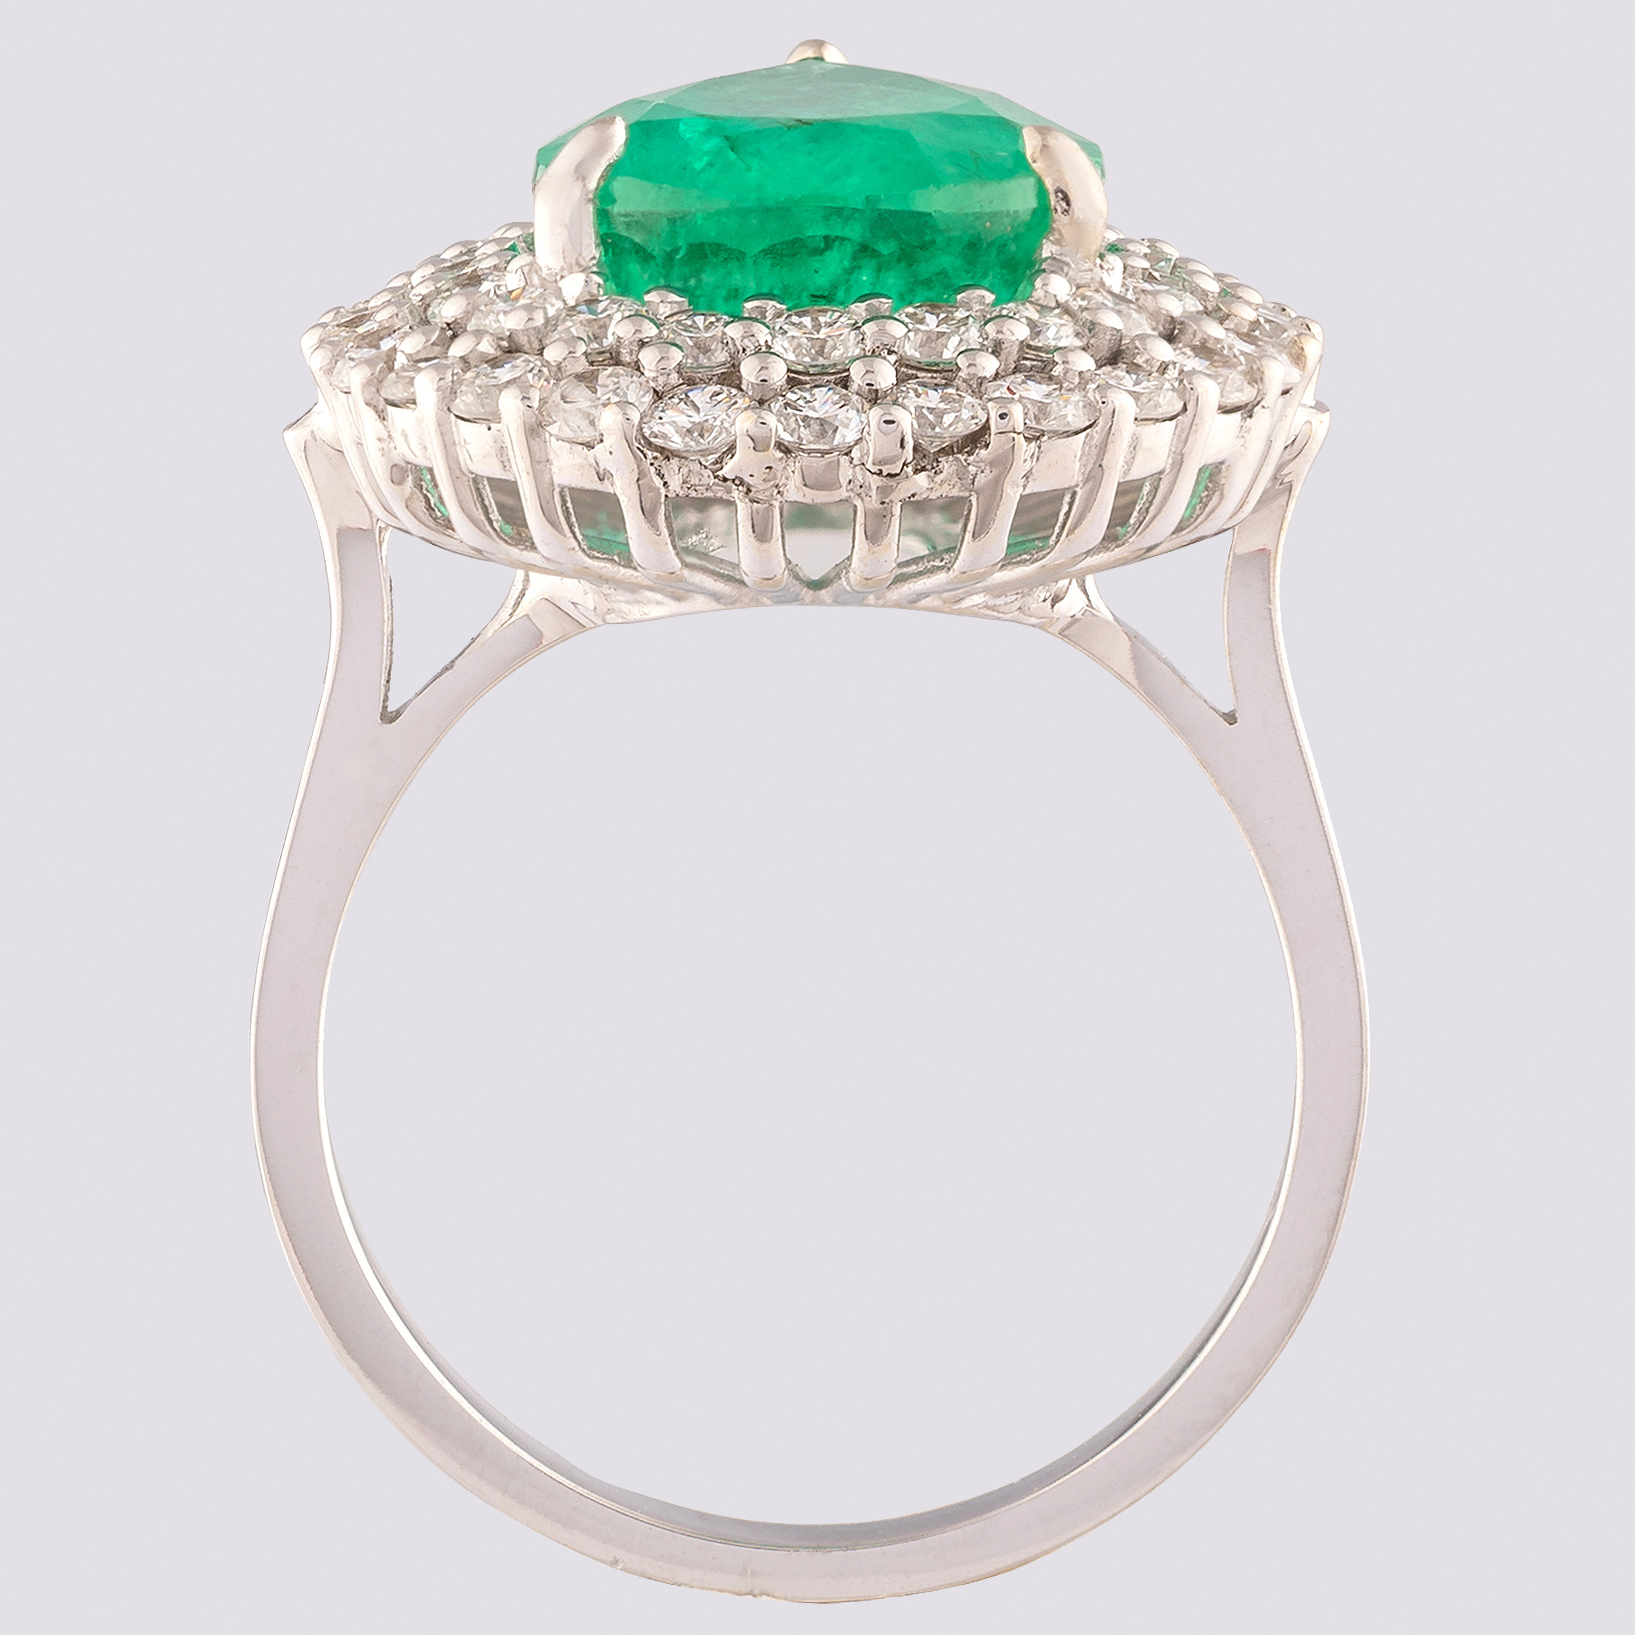 14K White Gold Cluster Ring 4,70 ct Natural Emerald - 1,40 ct Diamond - Image 4 of 4